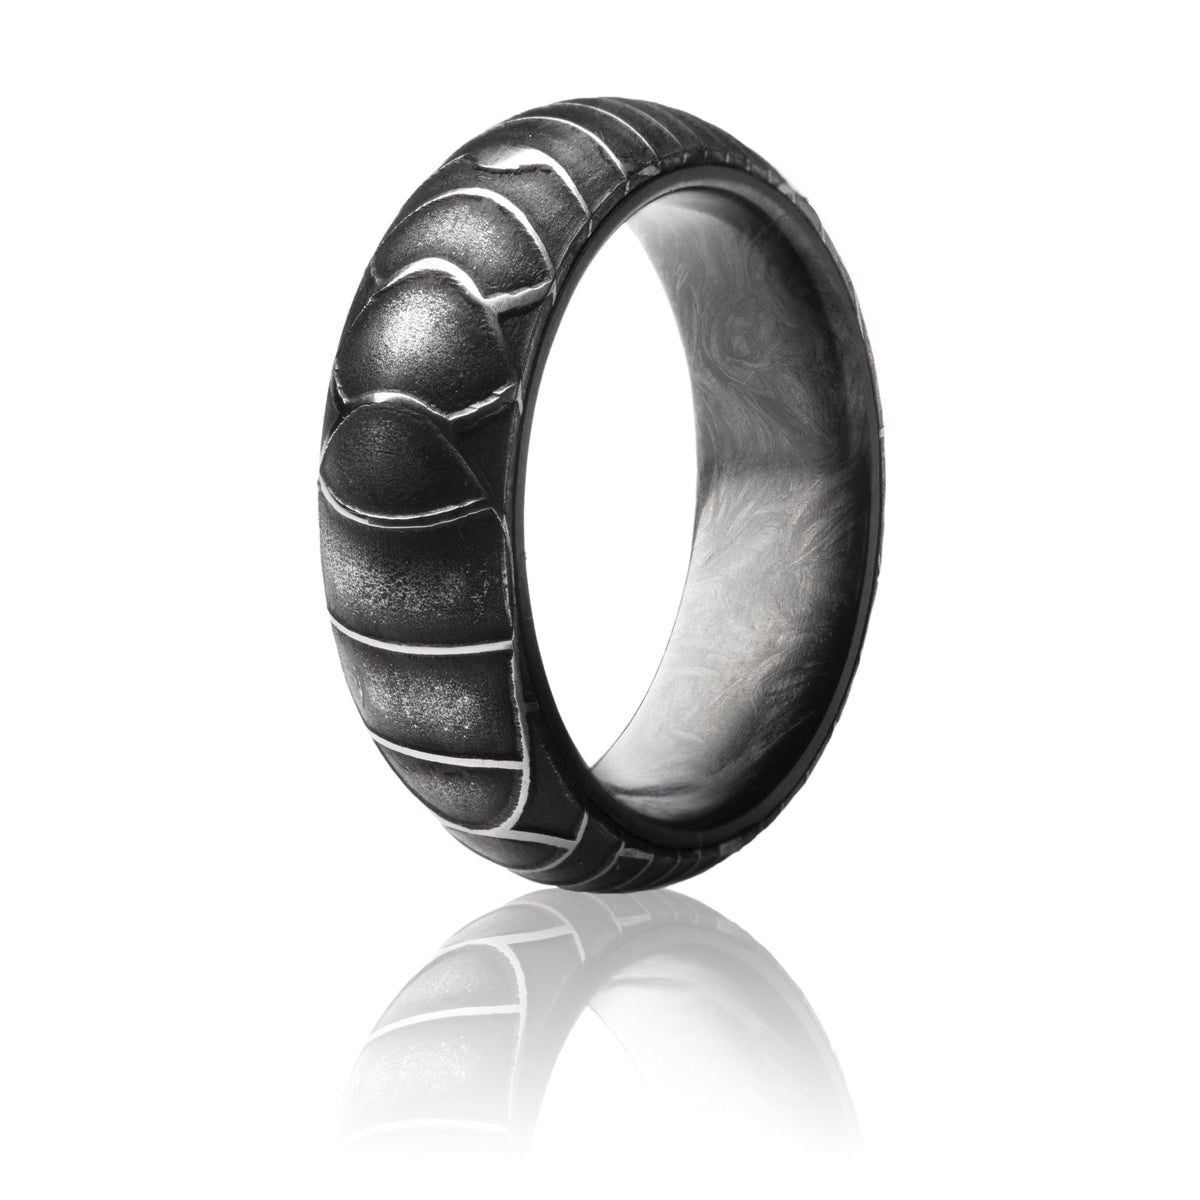 Damascus Steel Ring with exterior overlapping oval pattern and forged carbon fiber interior. 